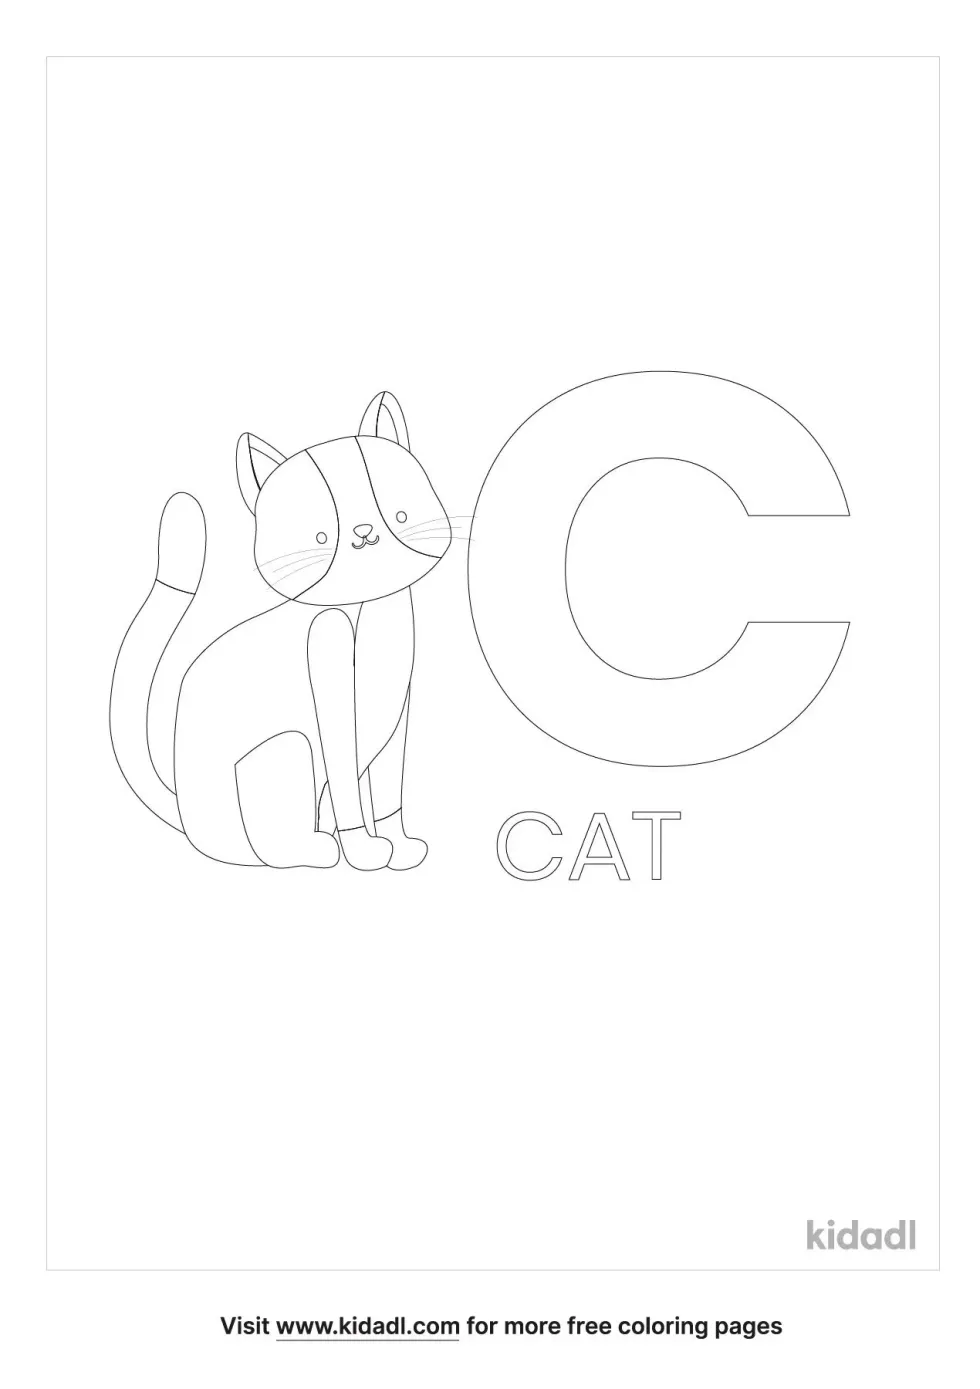 C Is For Cat